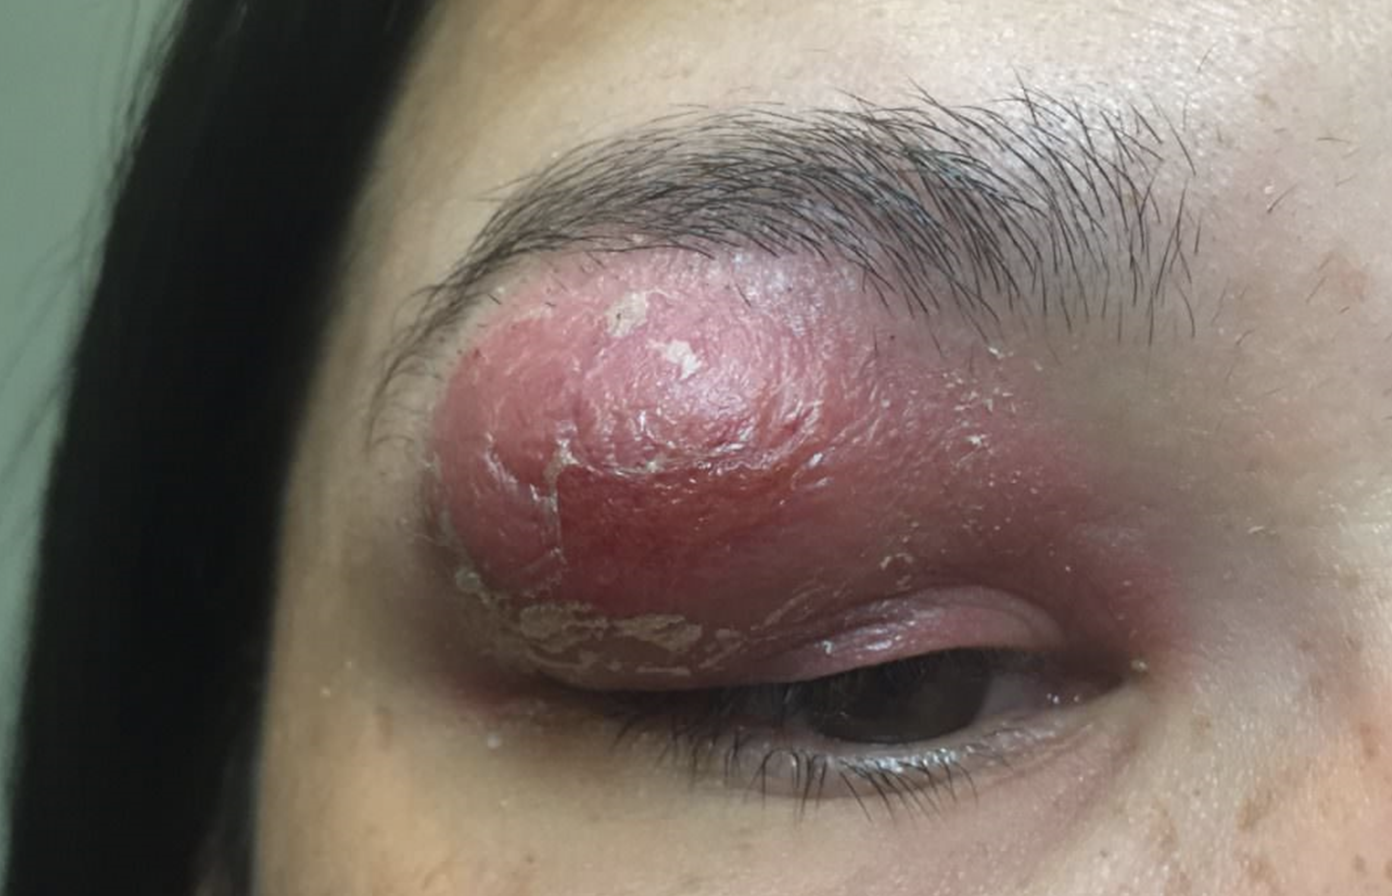 This severe preseptal cellulitis due to MRSA should be treated promptly with oral antibiotics.  